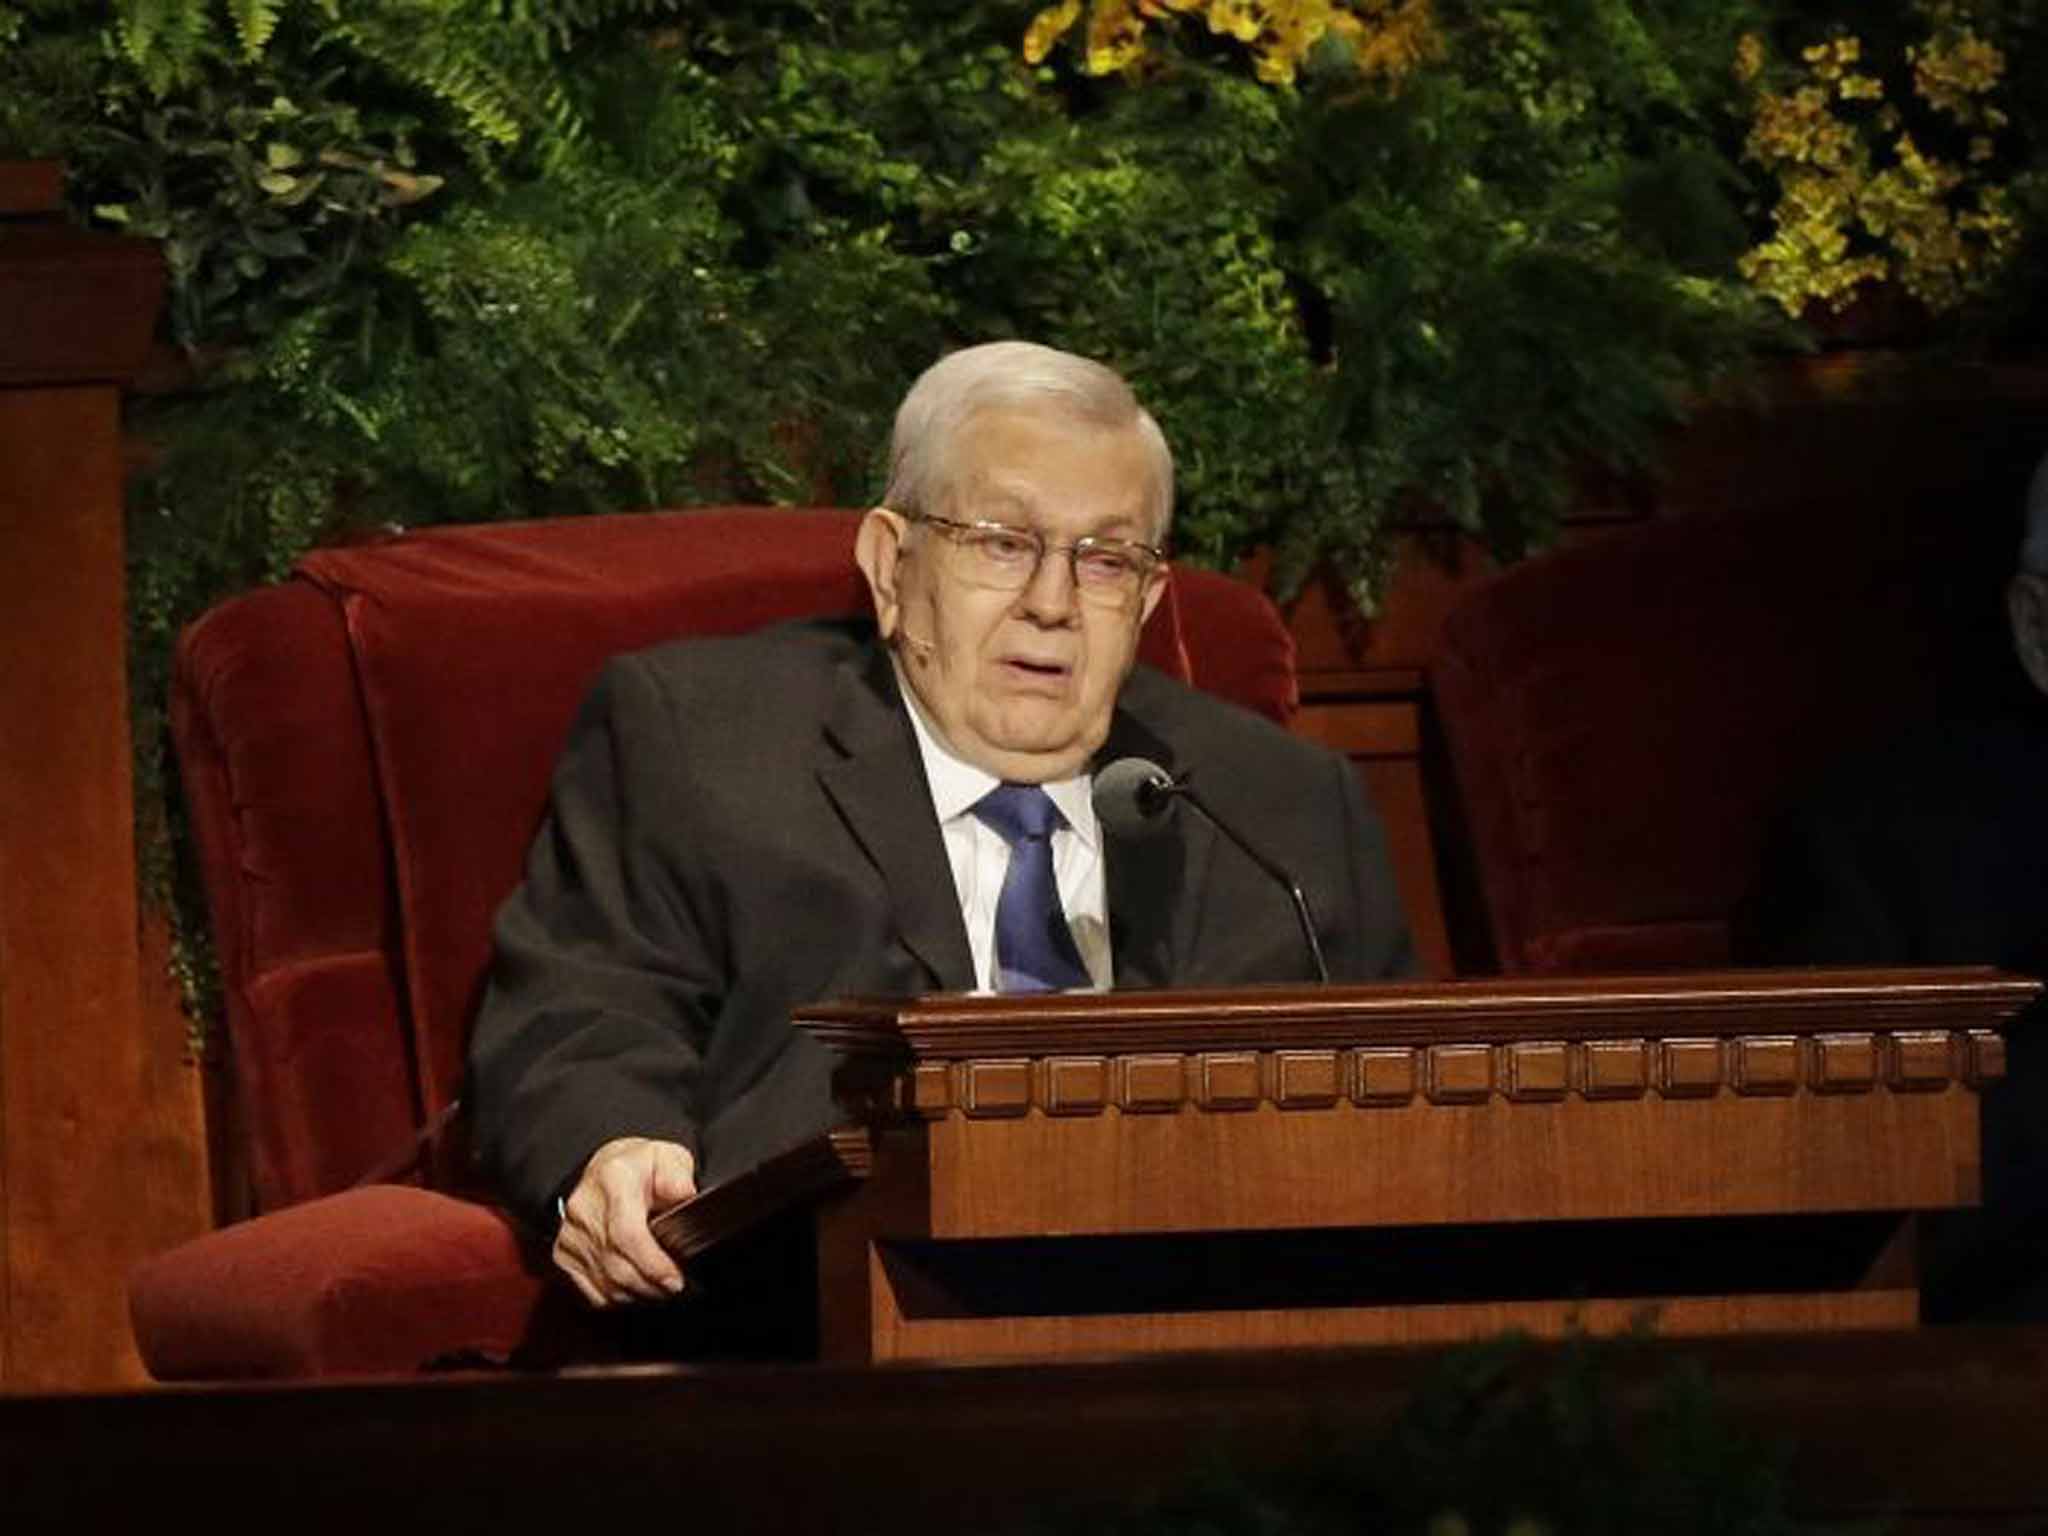 Packer in 2014: he served on the Quorum of the Twelve Apostles for 45 years